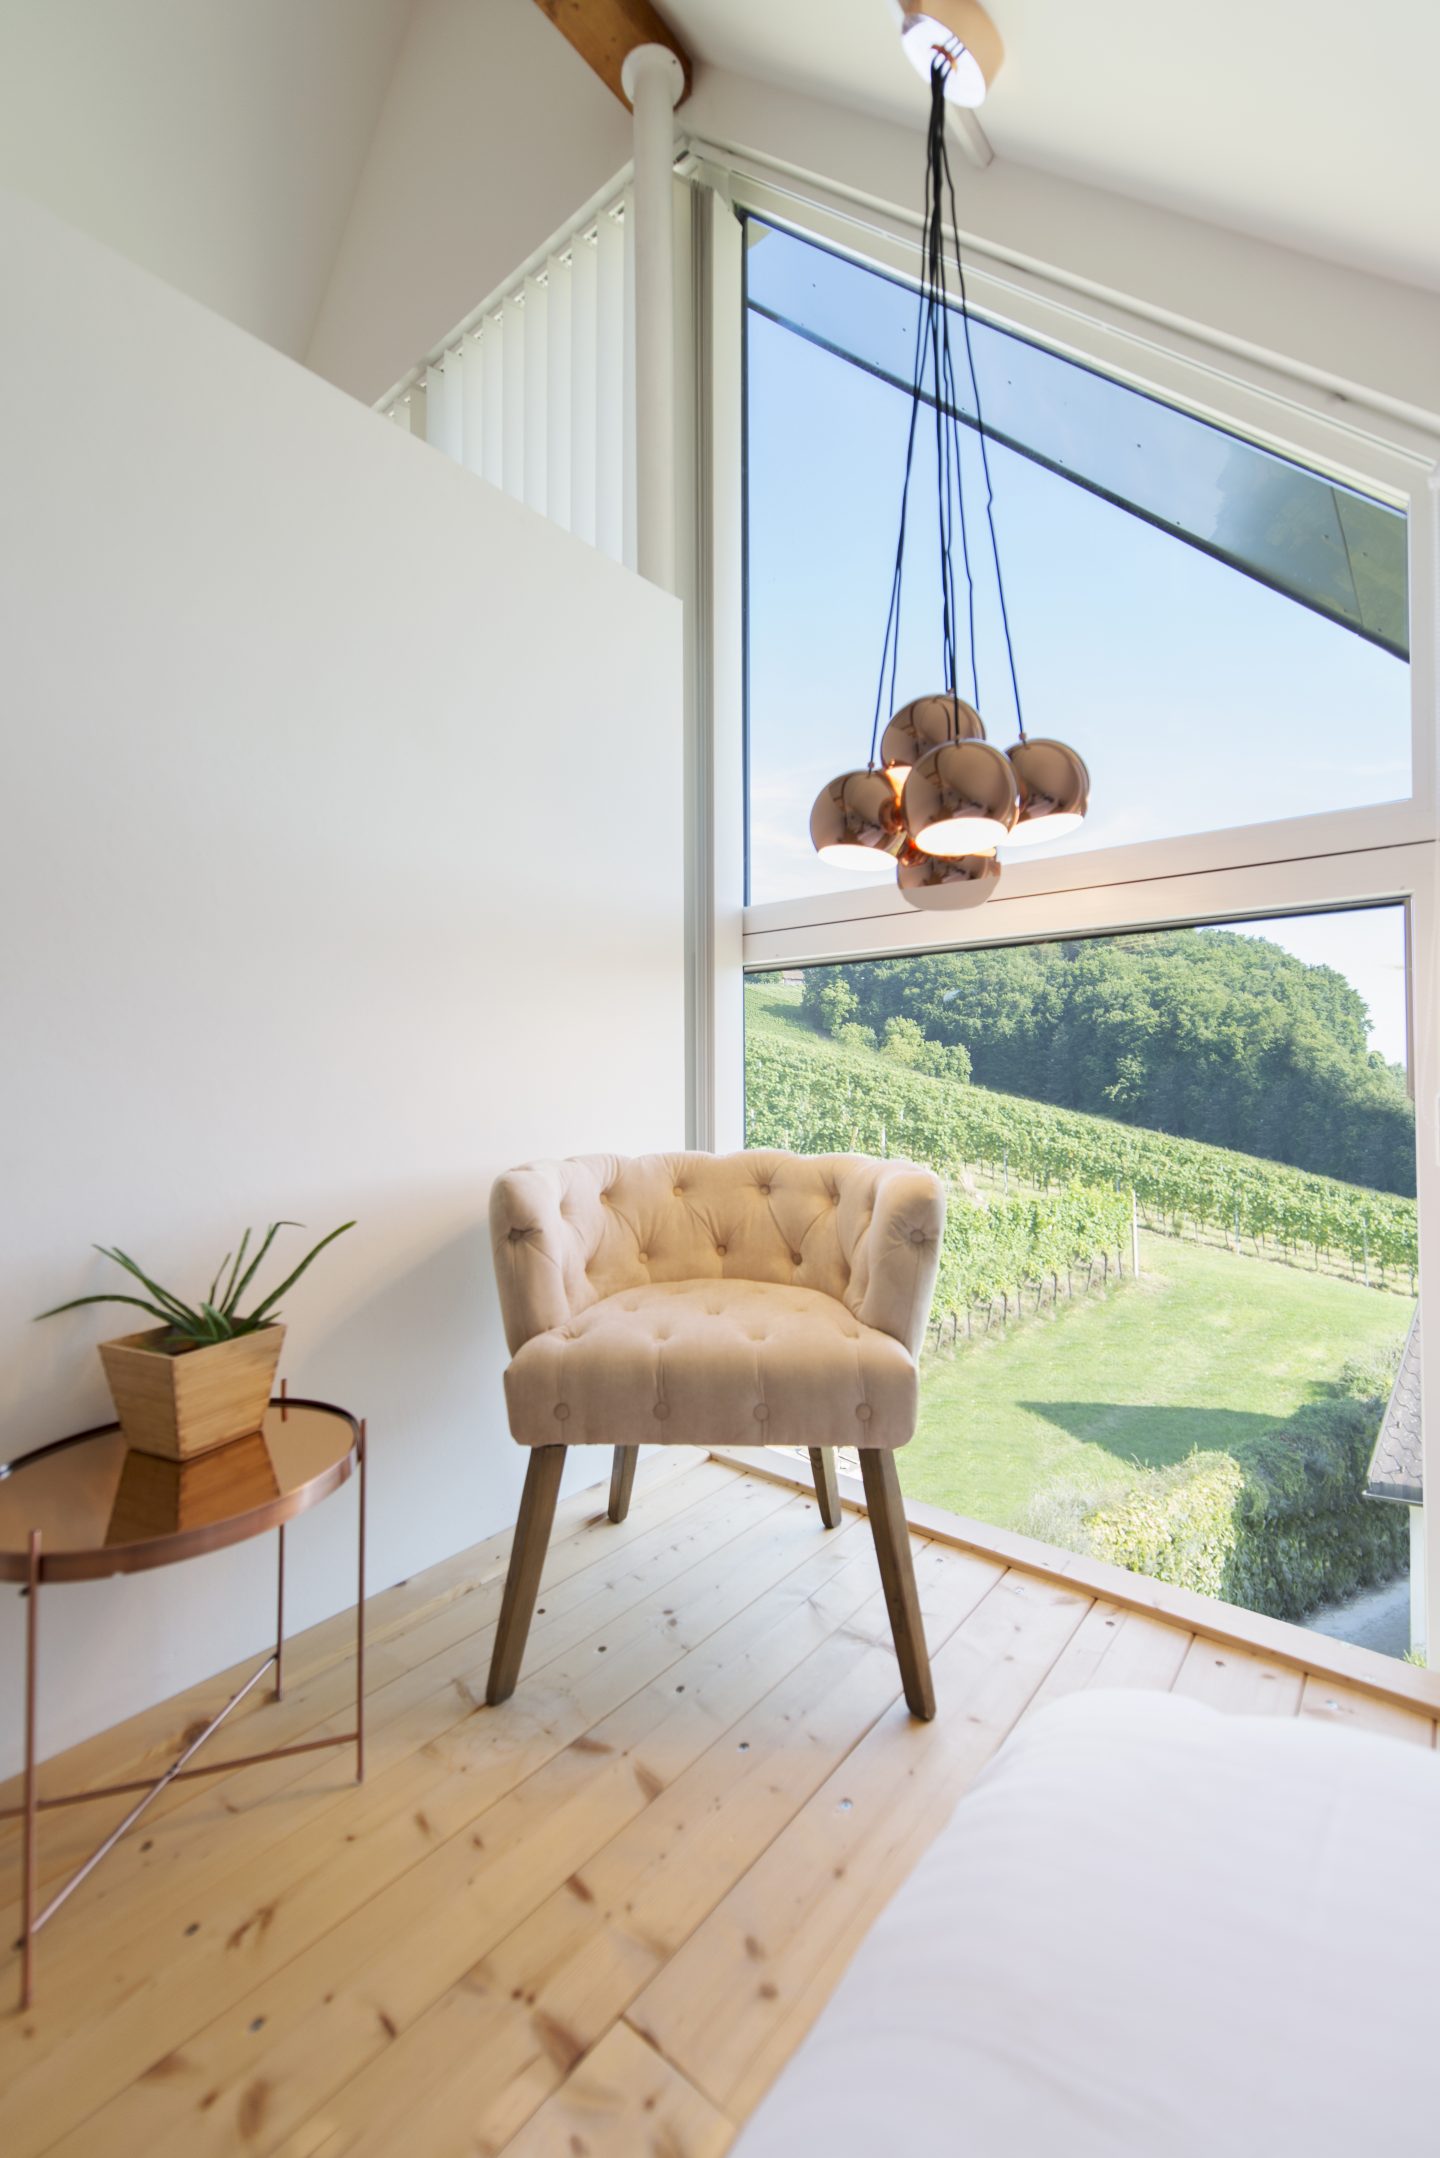 Can you open windows in a Passivhaus home?